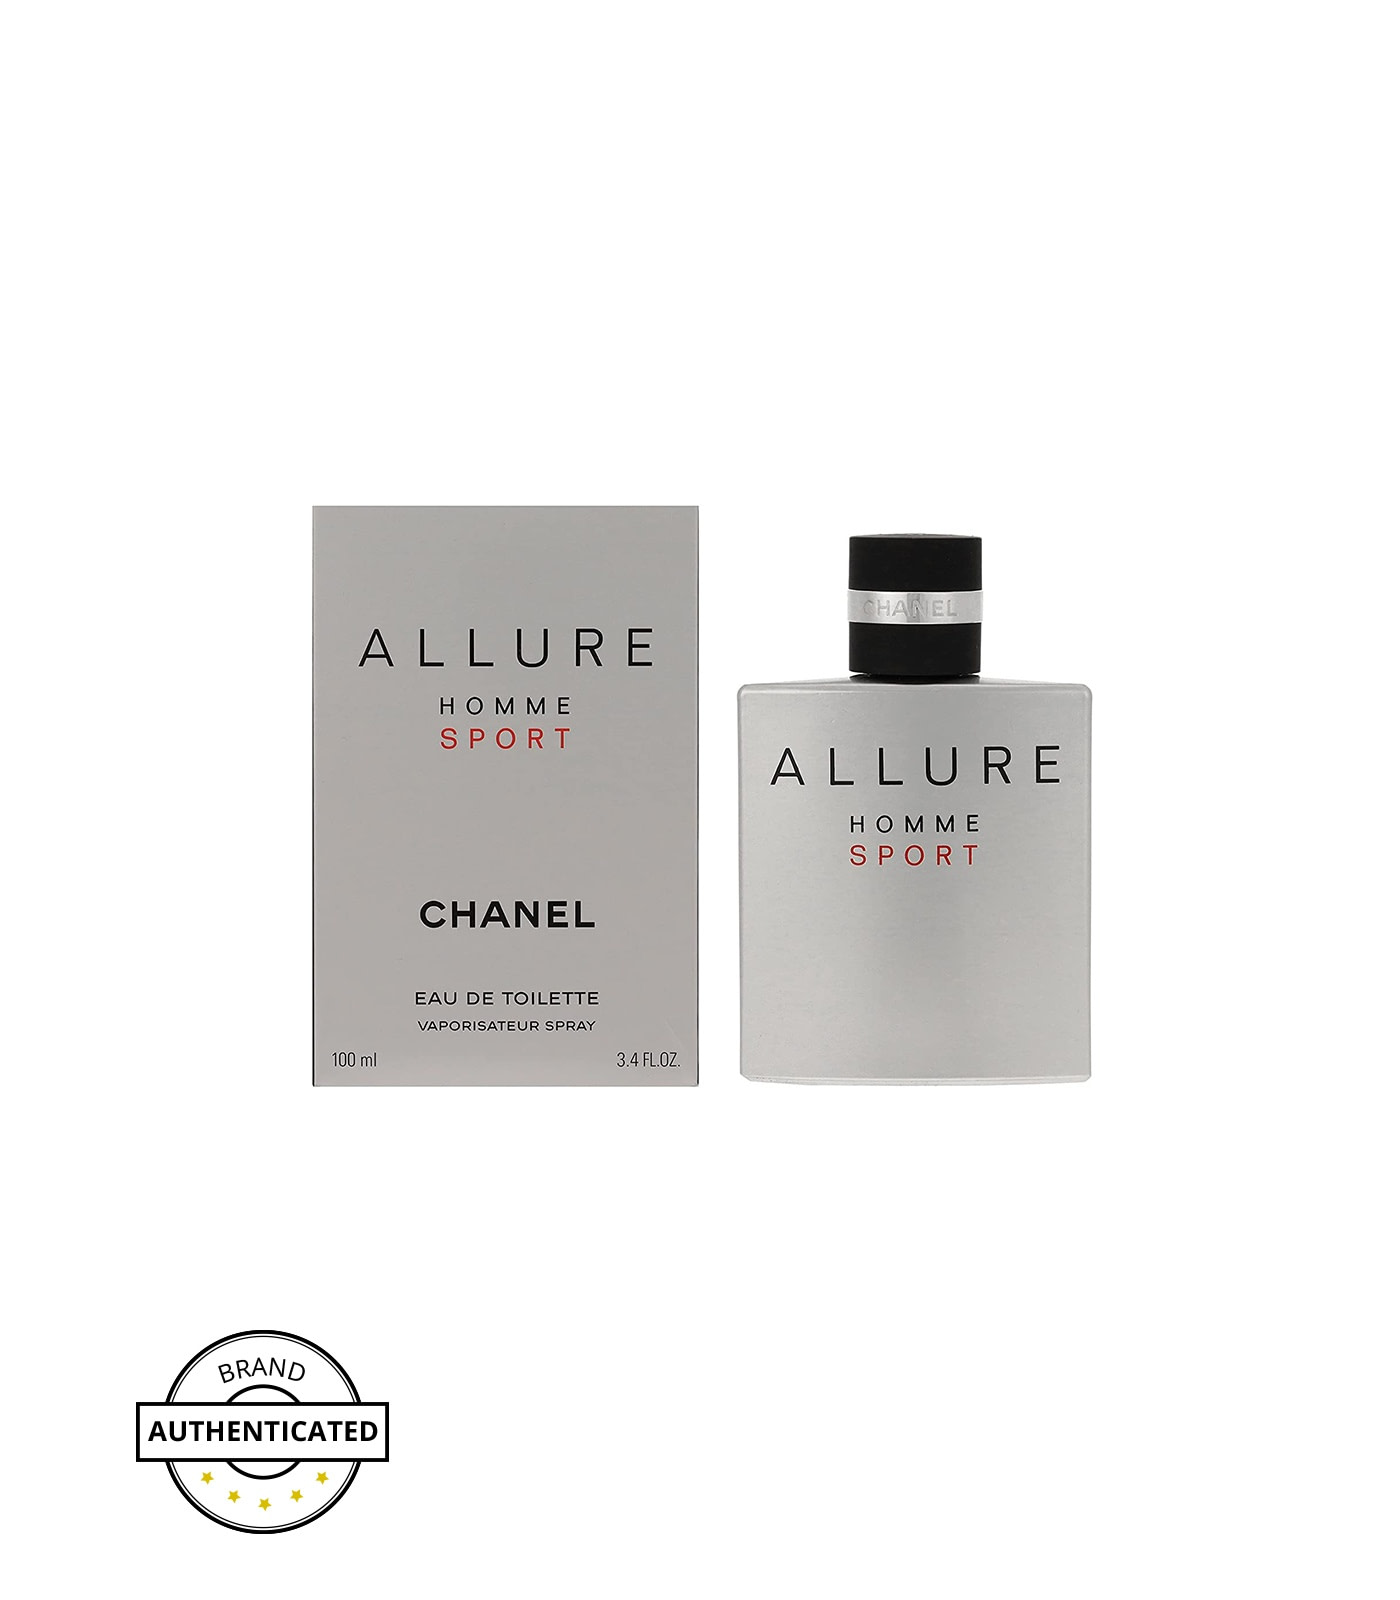 Духи allure sport. Chanel Allure homme Sport. Chanel Allure homme Sport мужские. Шанель духи мужские Allure. Chanel Allure homme Sport 100ml.